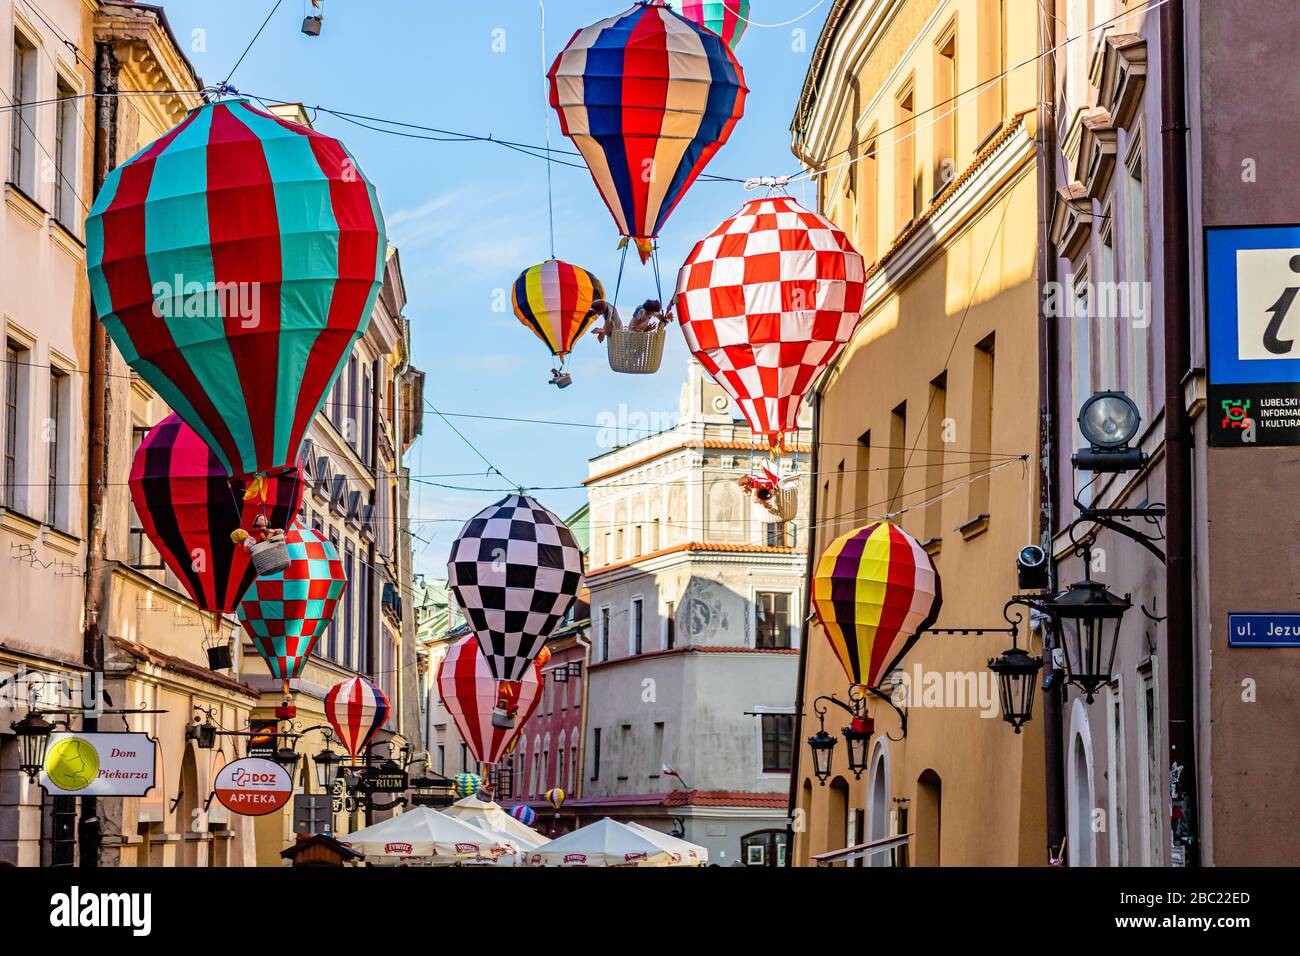 Miniature hot air balloons decorate the streets of Lublin for the city's 700th anniversary. Lublin, Poland. June 2017. Stock Photo